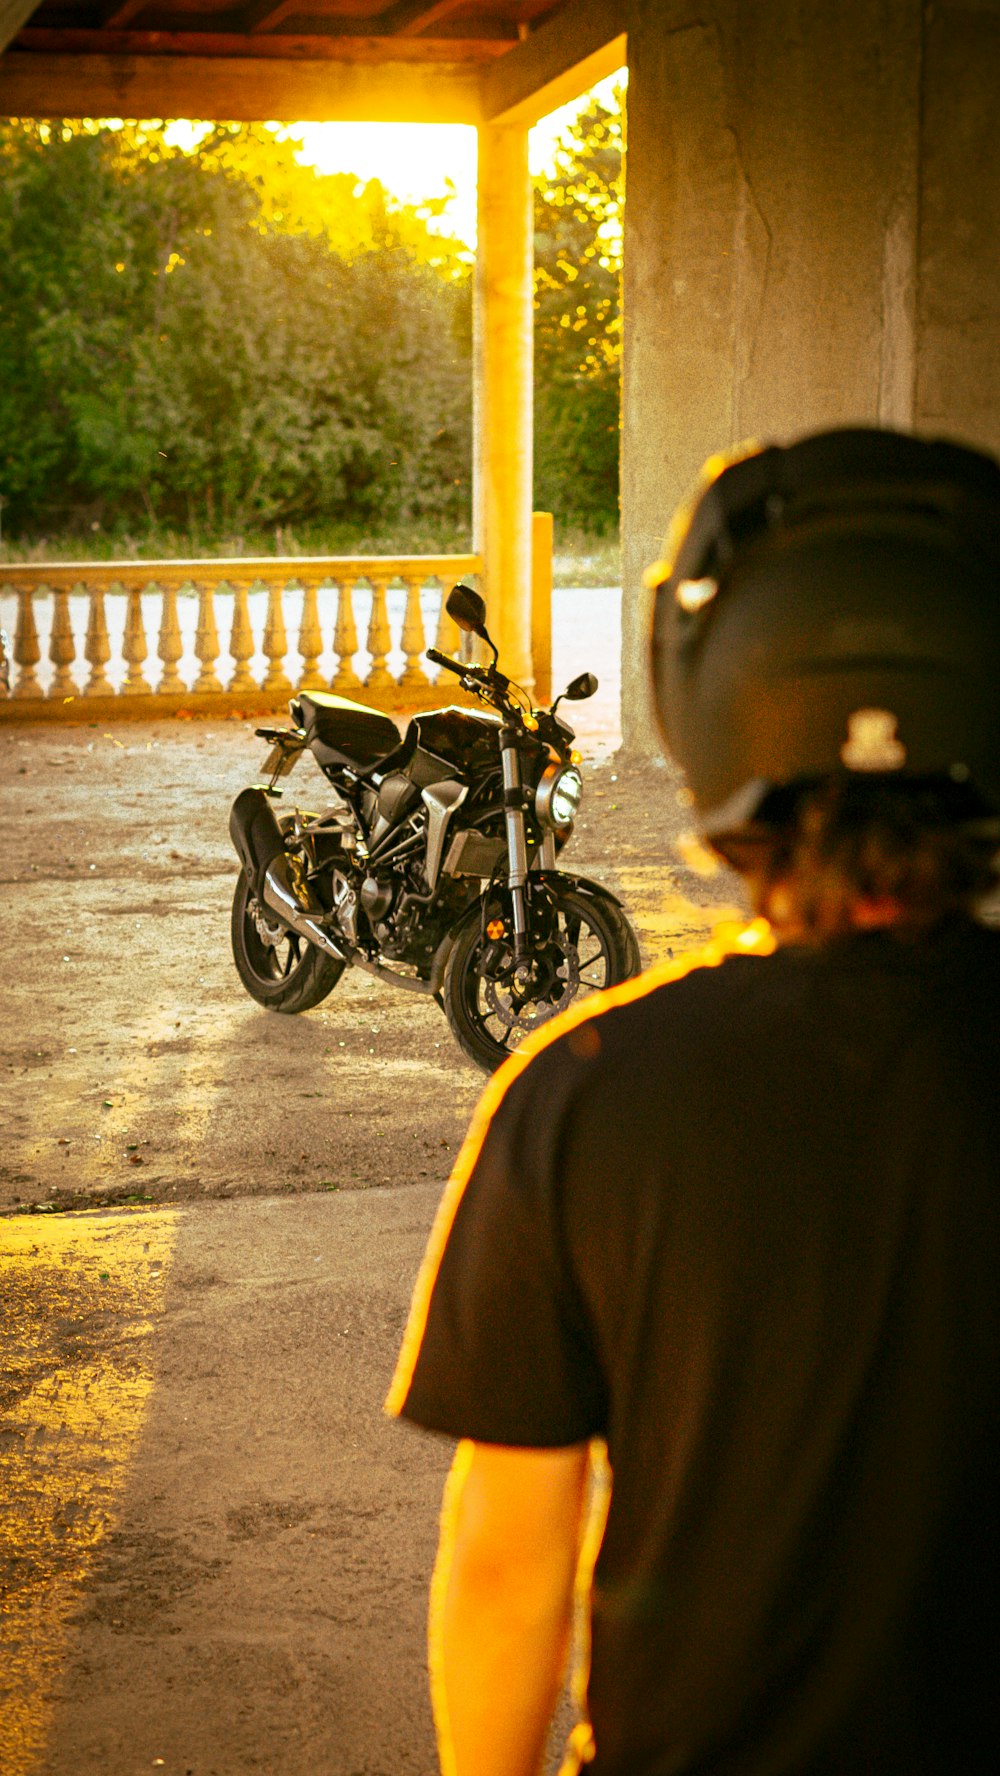 a person wearing a helmet looking at a motorcycle